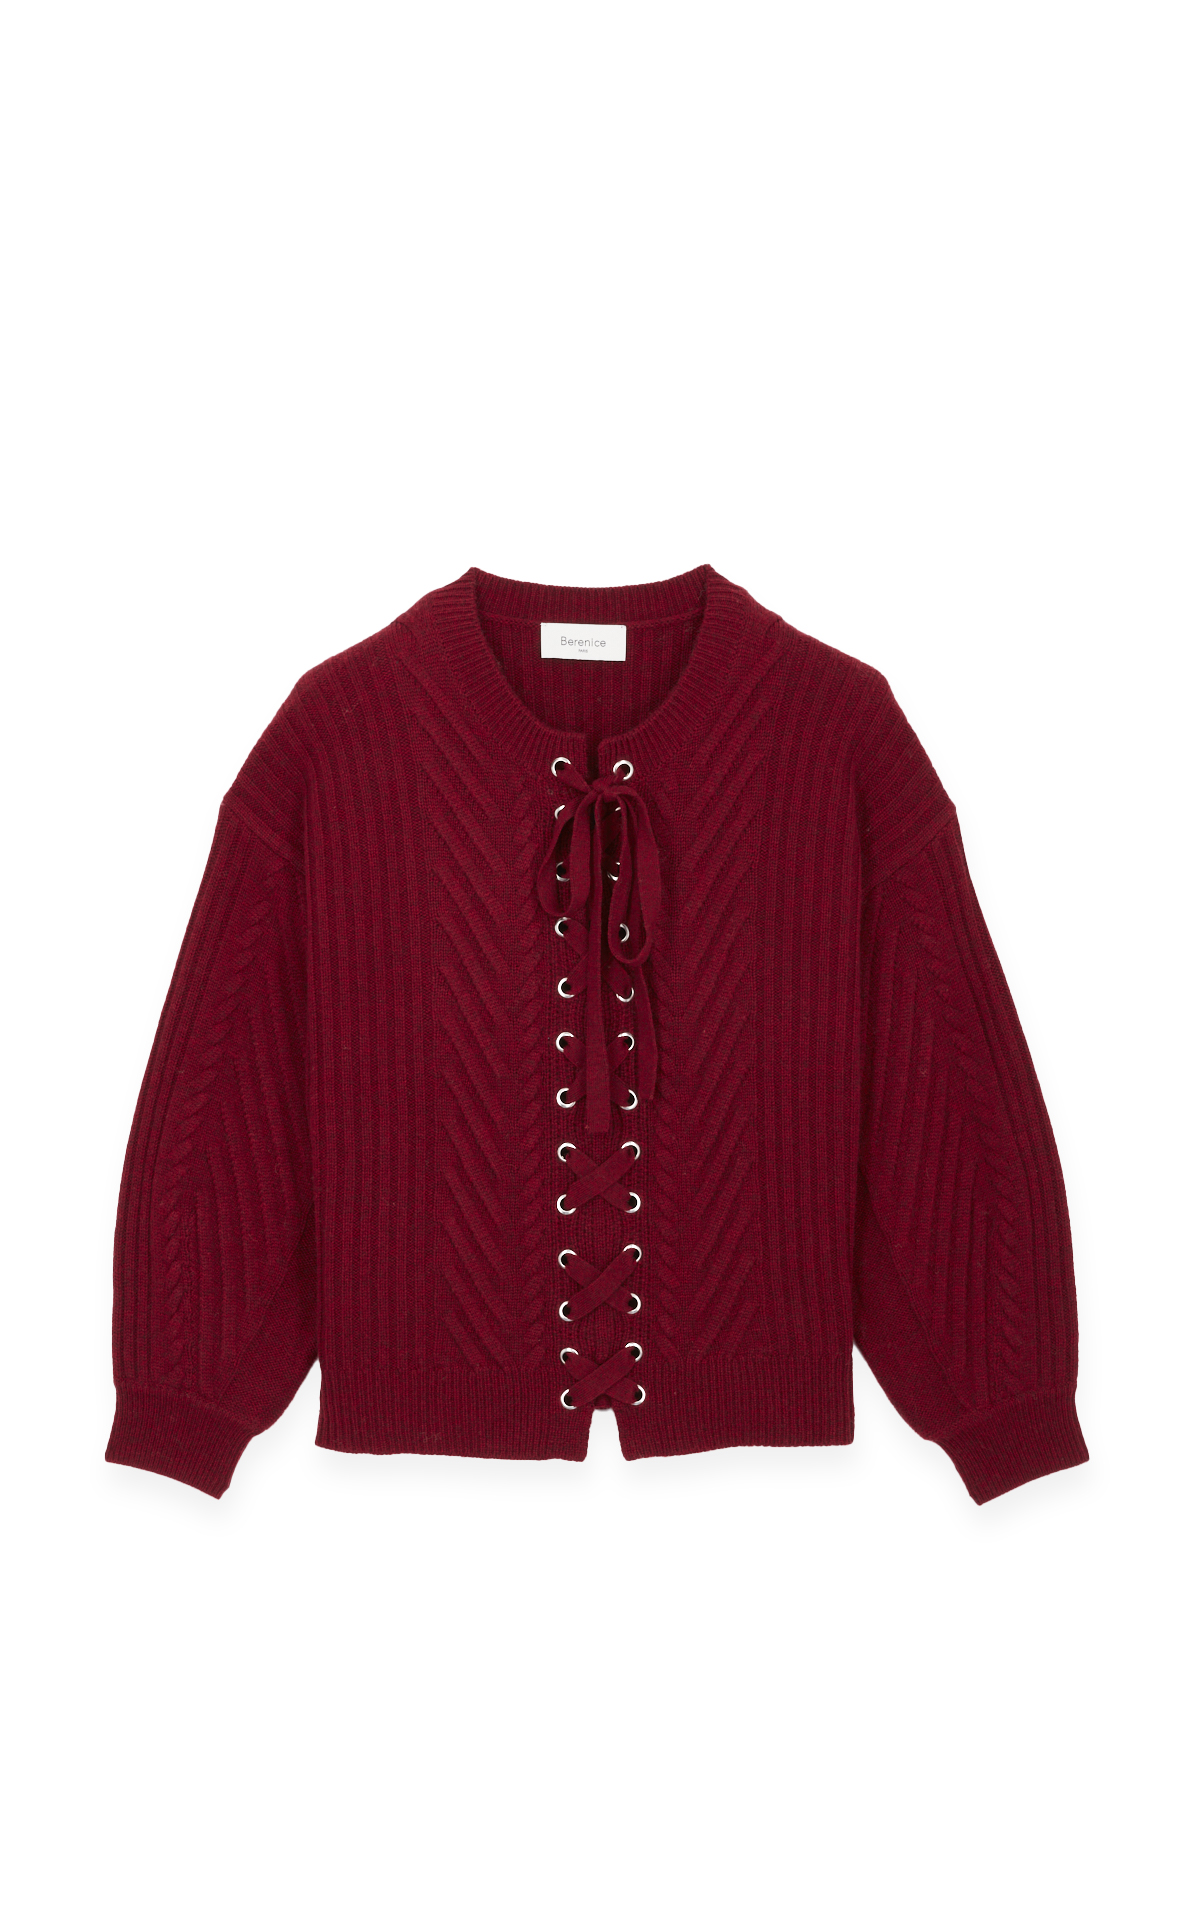 Round neck lace-up wool jumper*